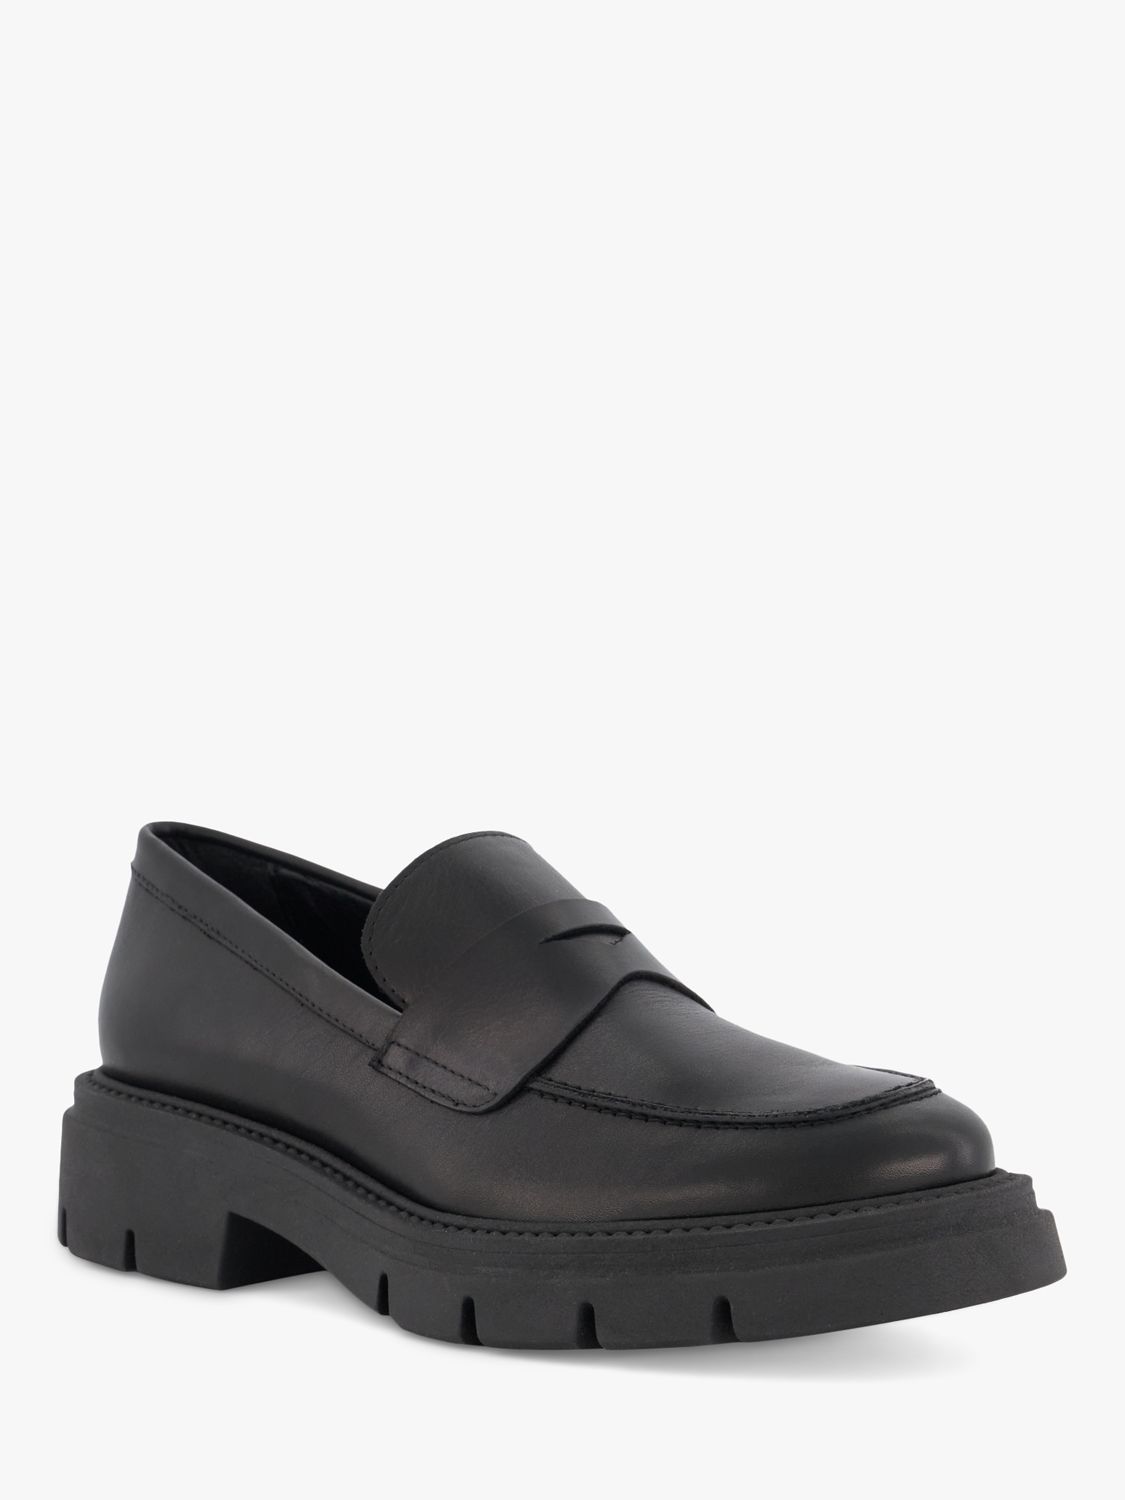 Dune Gracelyne Leather Penny Trim Chunky Loafers, Black at John Lewis ...